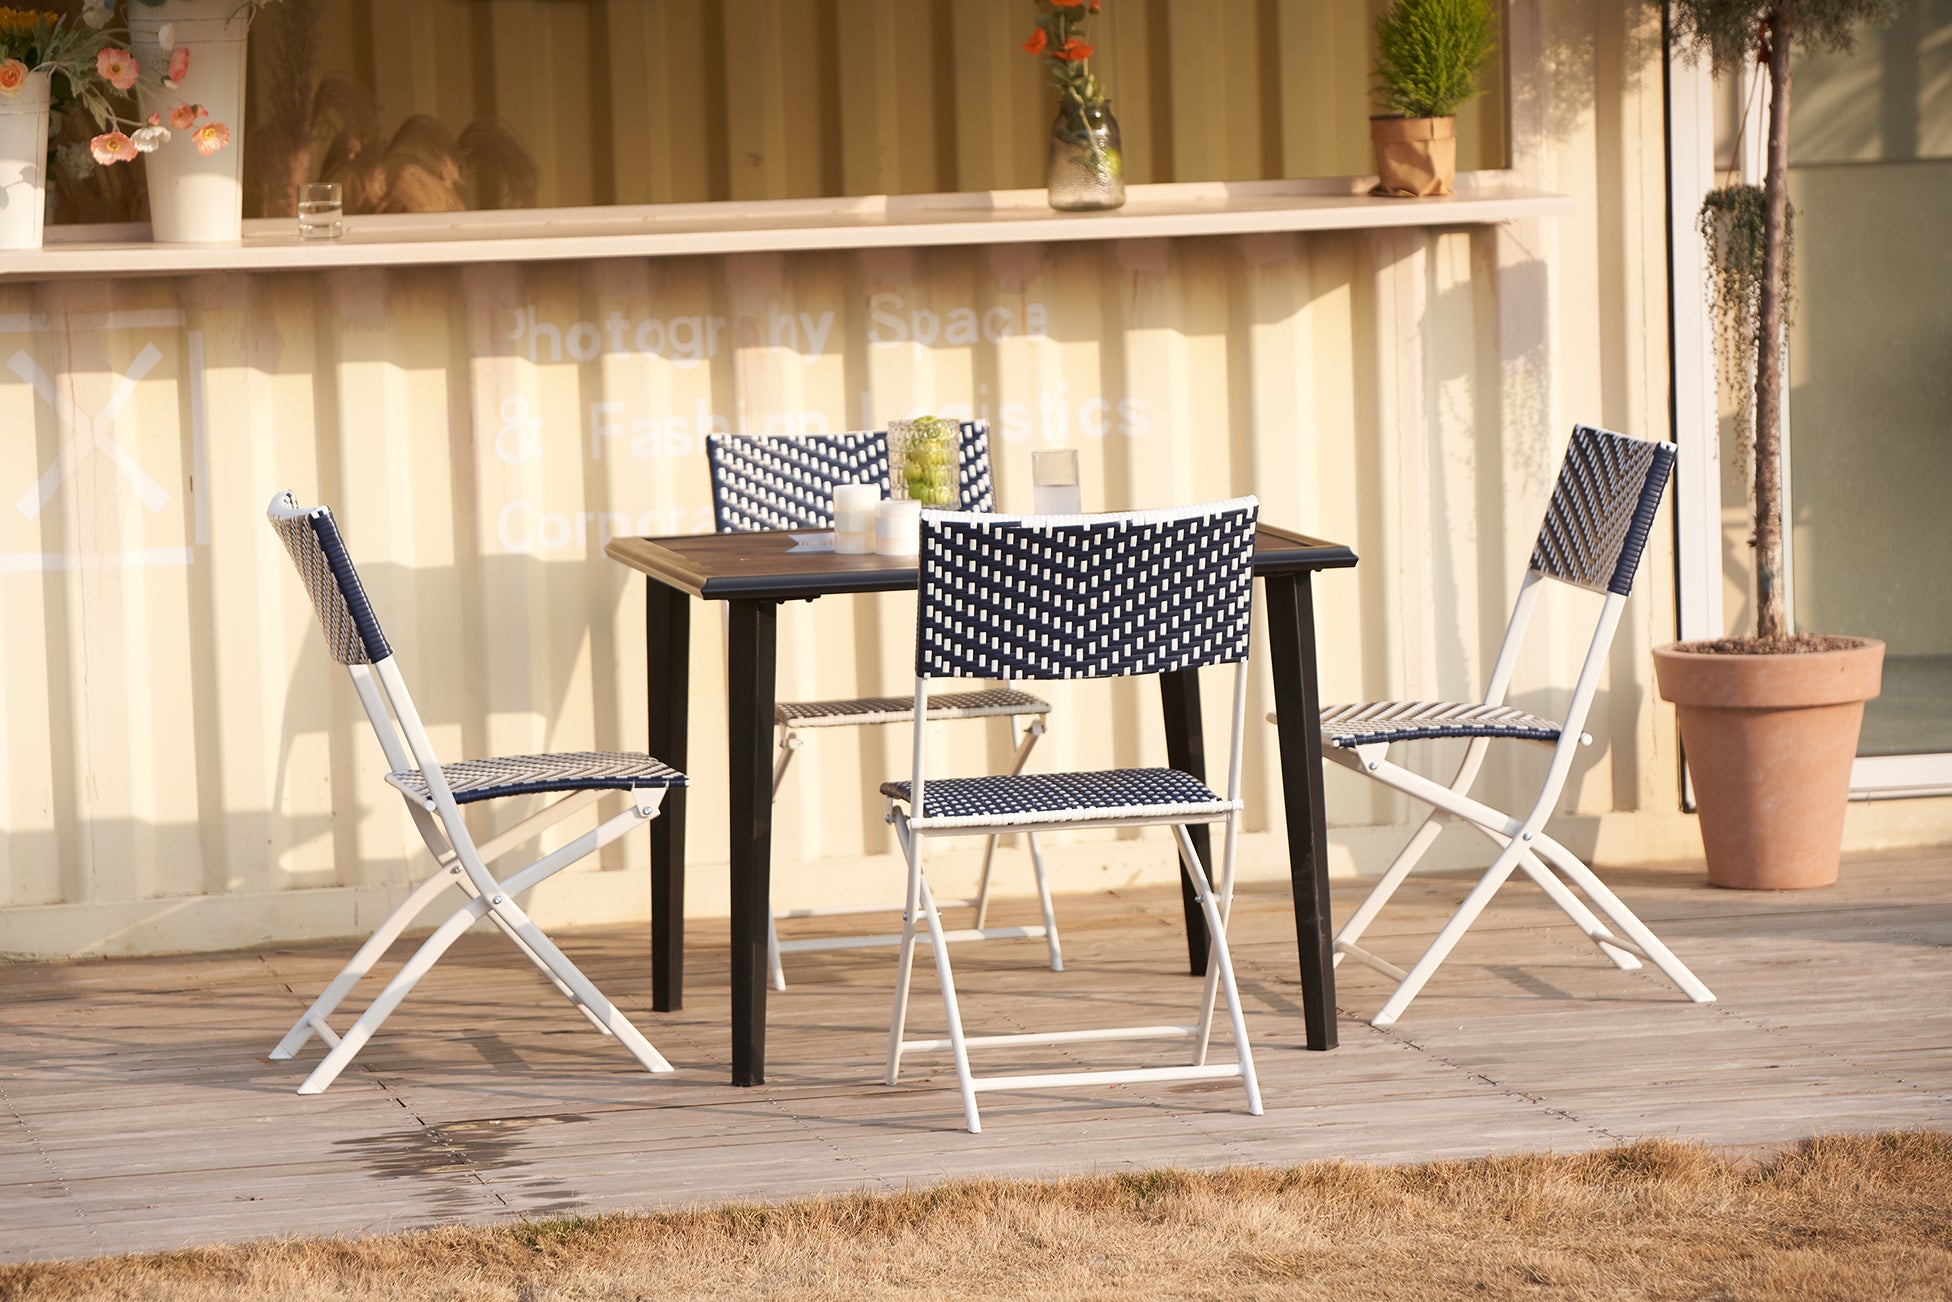 VICLLAX outdoor dining set